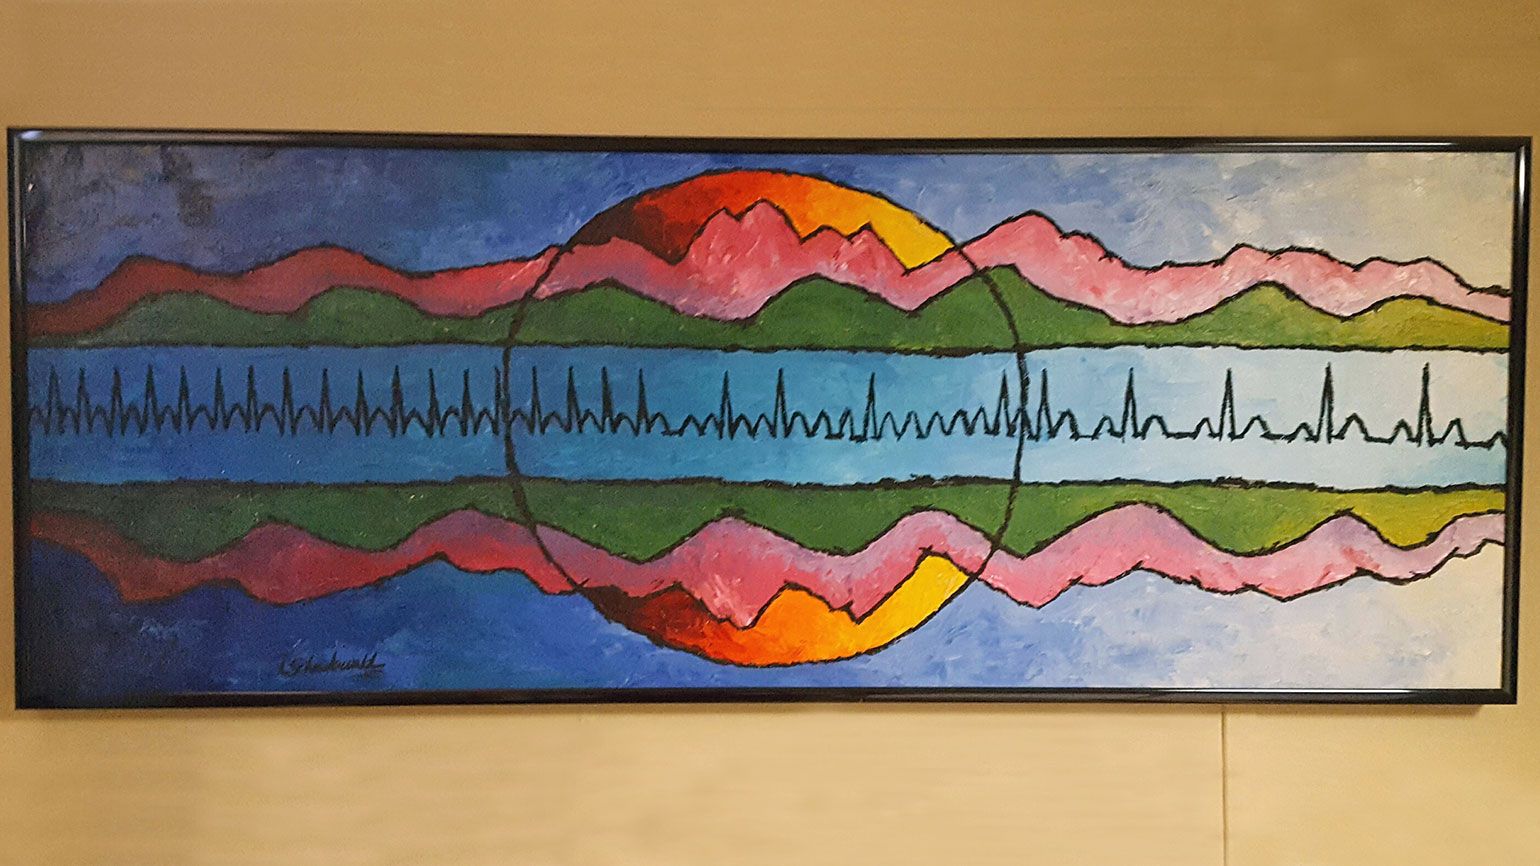 Another of Linda's heart-rhythm paintings